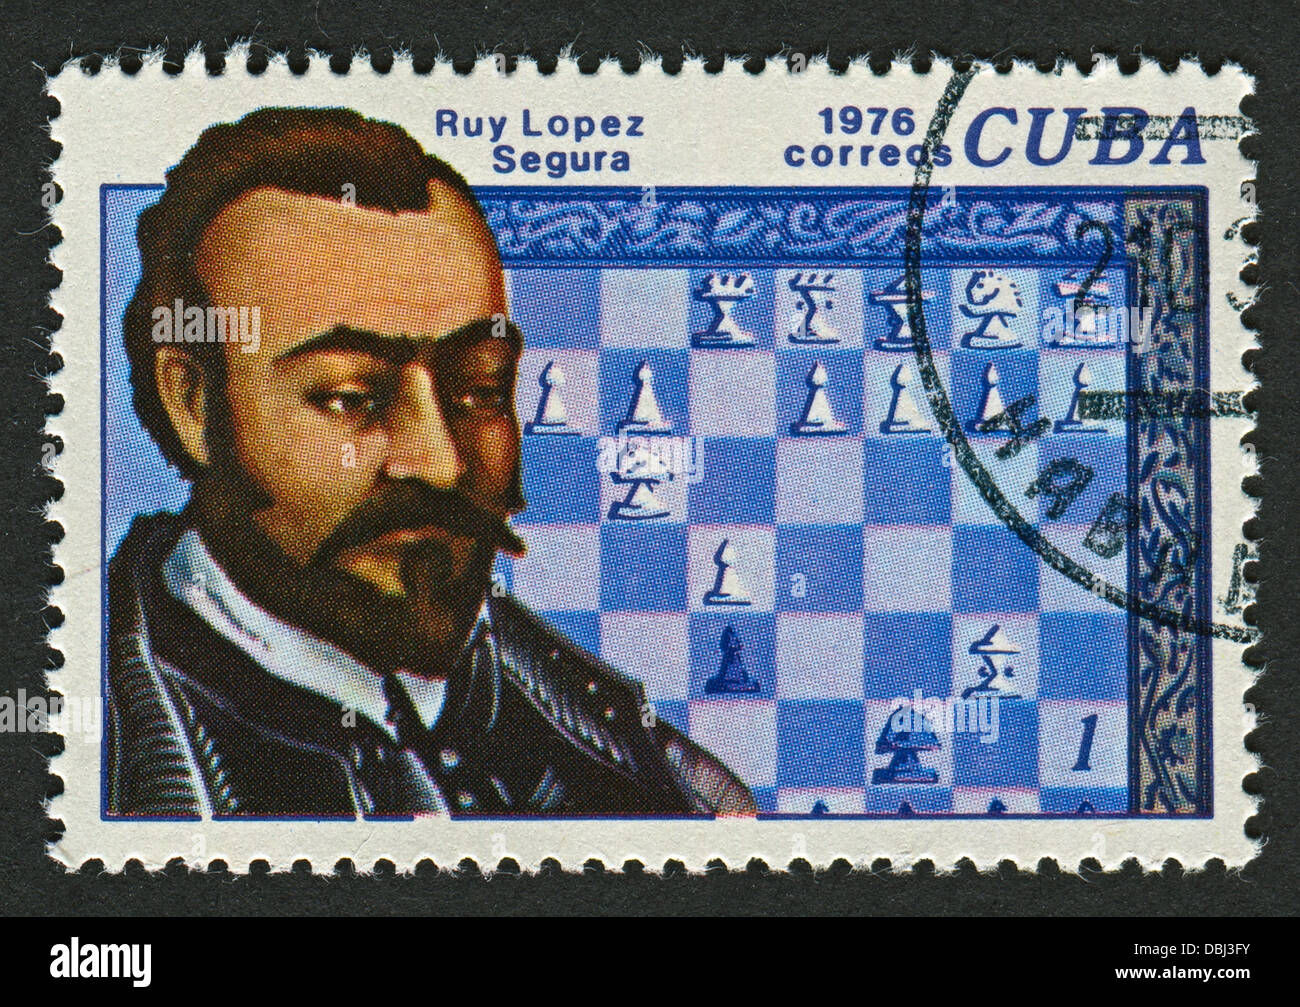 Personalities - Ruy Lopez de Segura, Spain Stamps, Worldwide Stamps,  Coins Banknotes and Accessories for Collectors